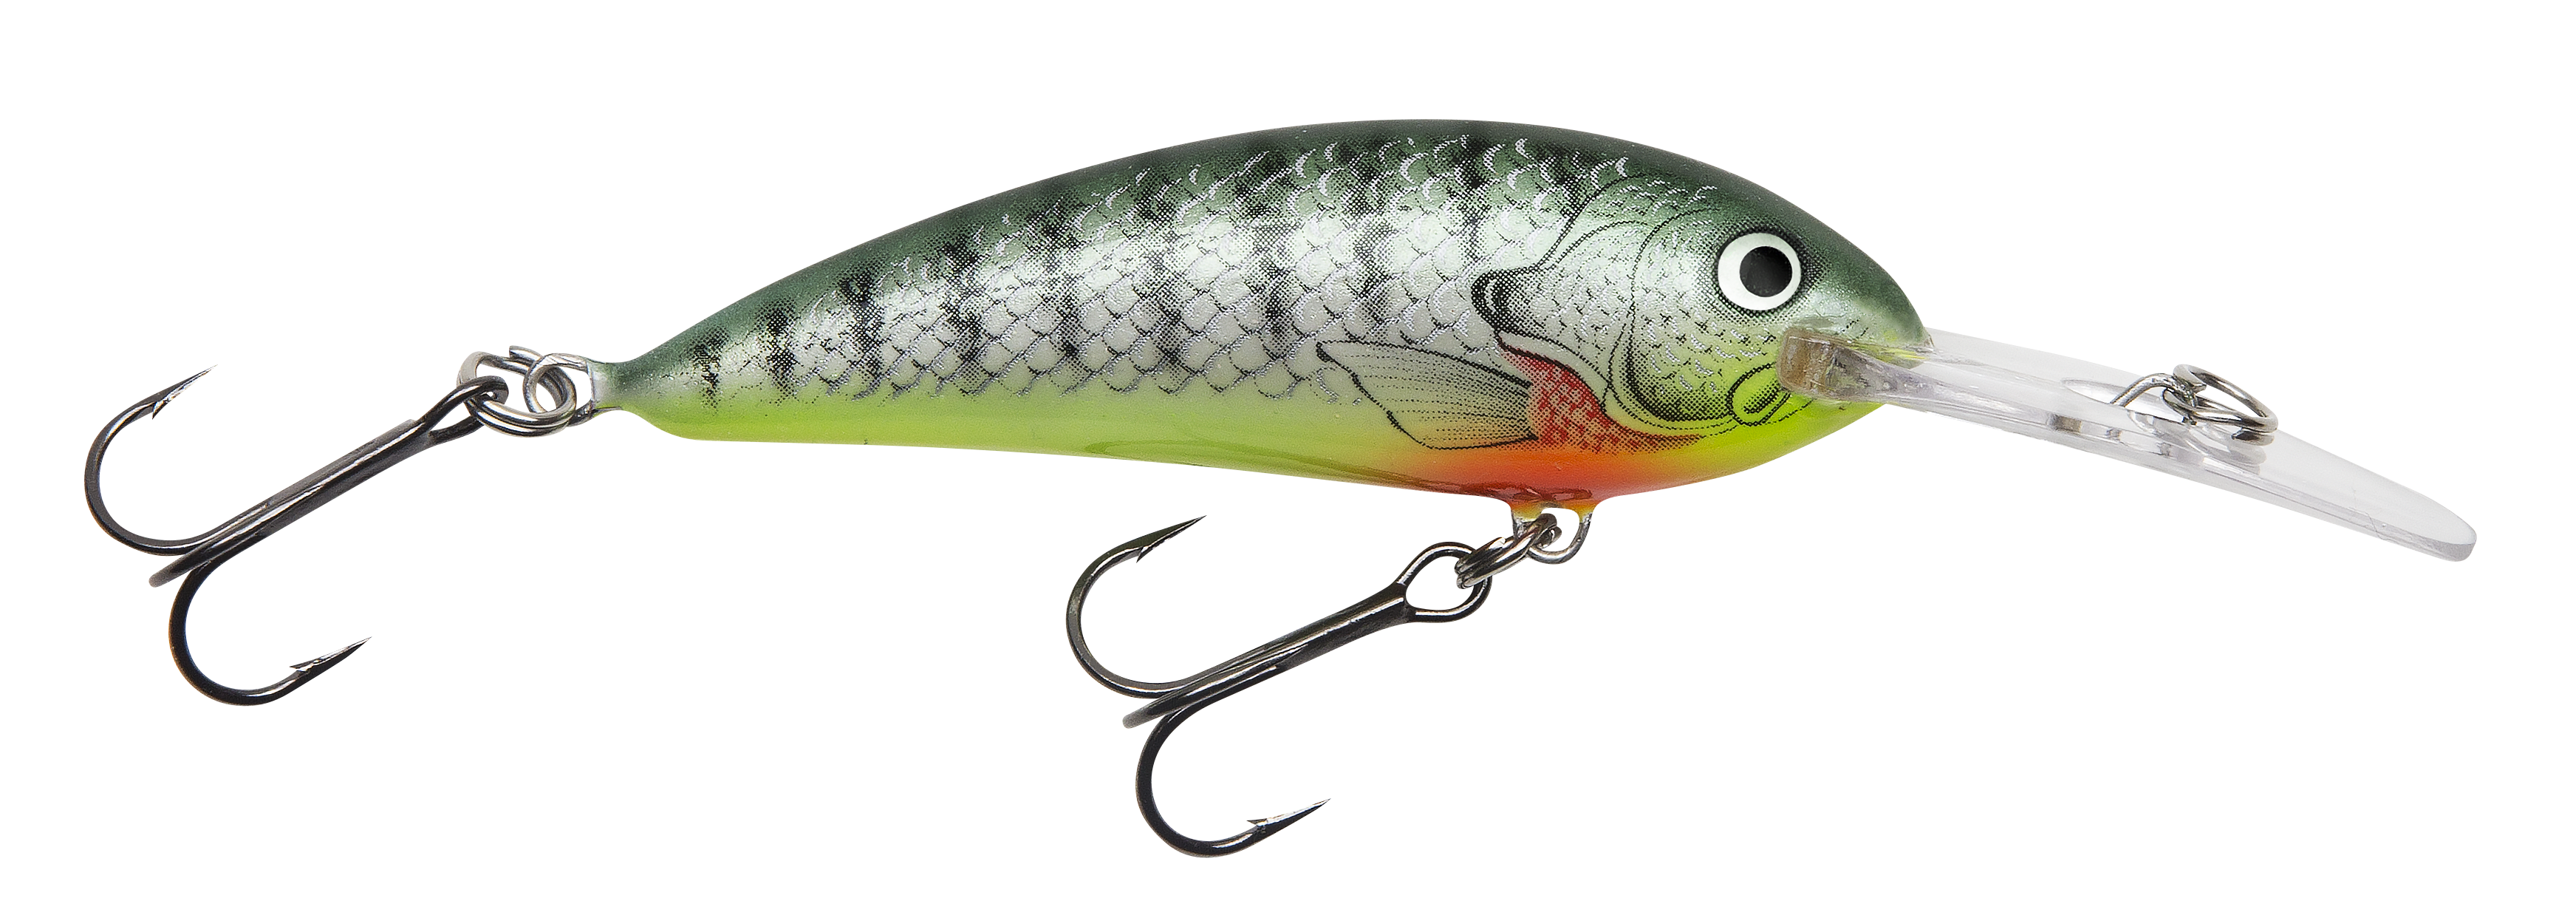 Bass Fishing Tackle | Online Tackle Shop